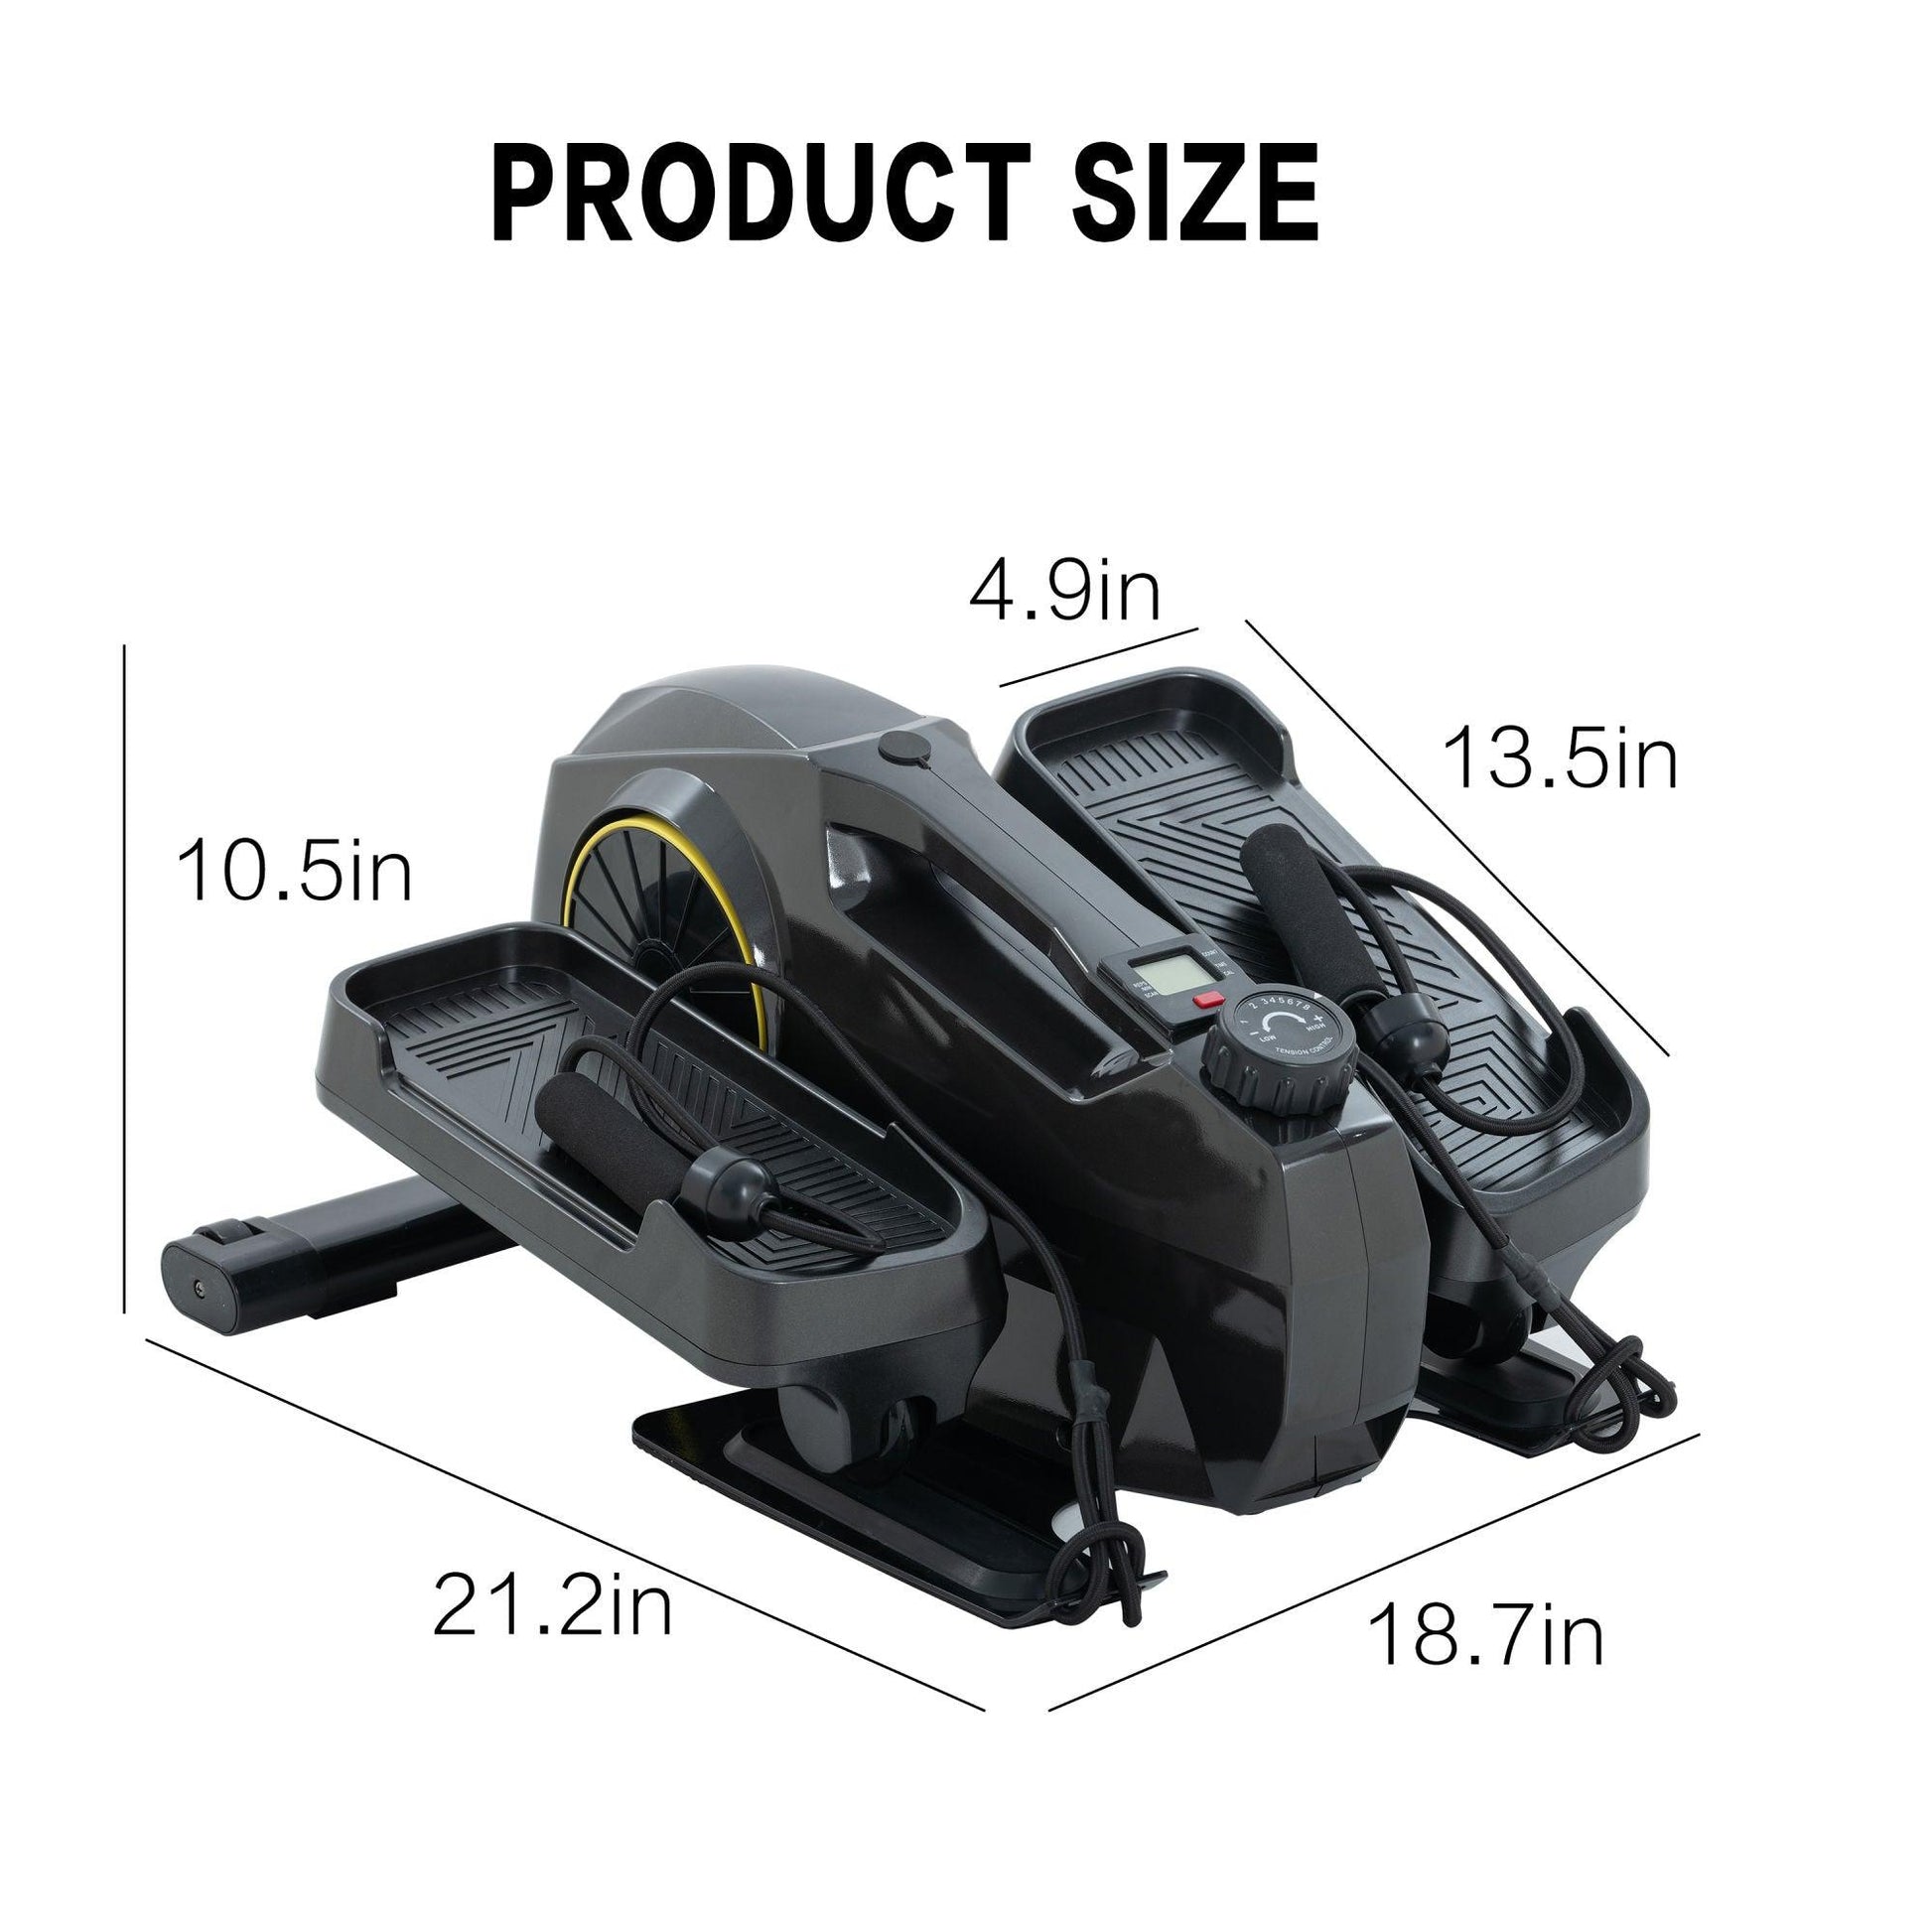 LazyBot™ G07 Mechanical Elliptical Machine with adjustable resistance and speed suitable for home office use multi-function under table sports pedal - Lazy Pro